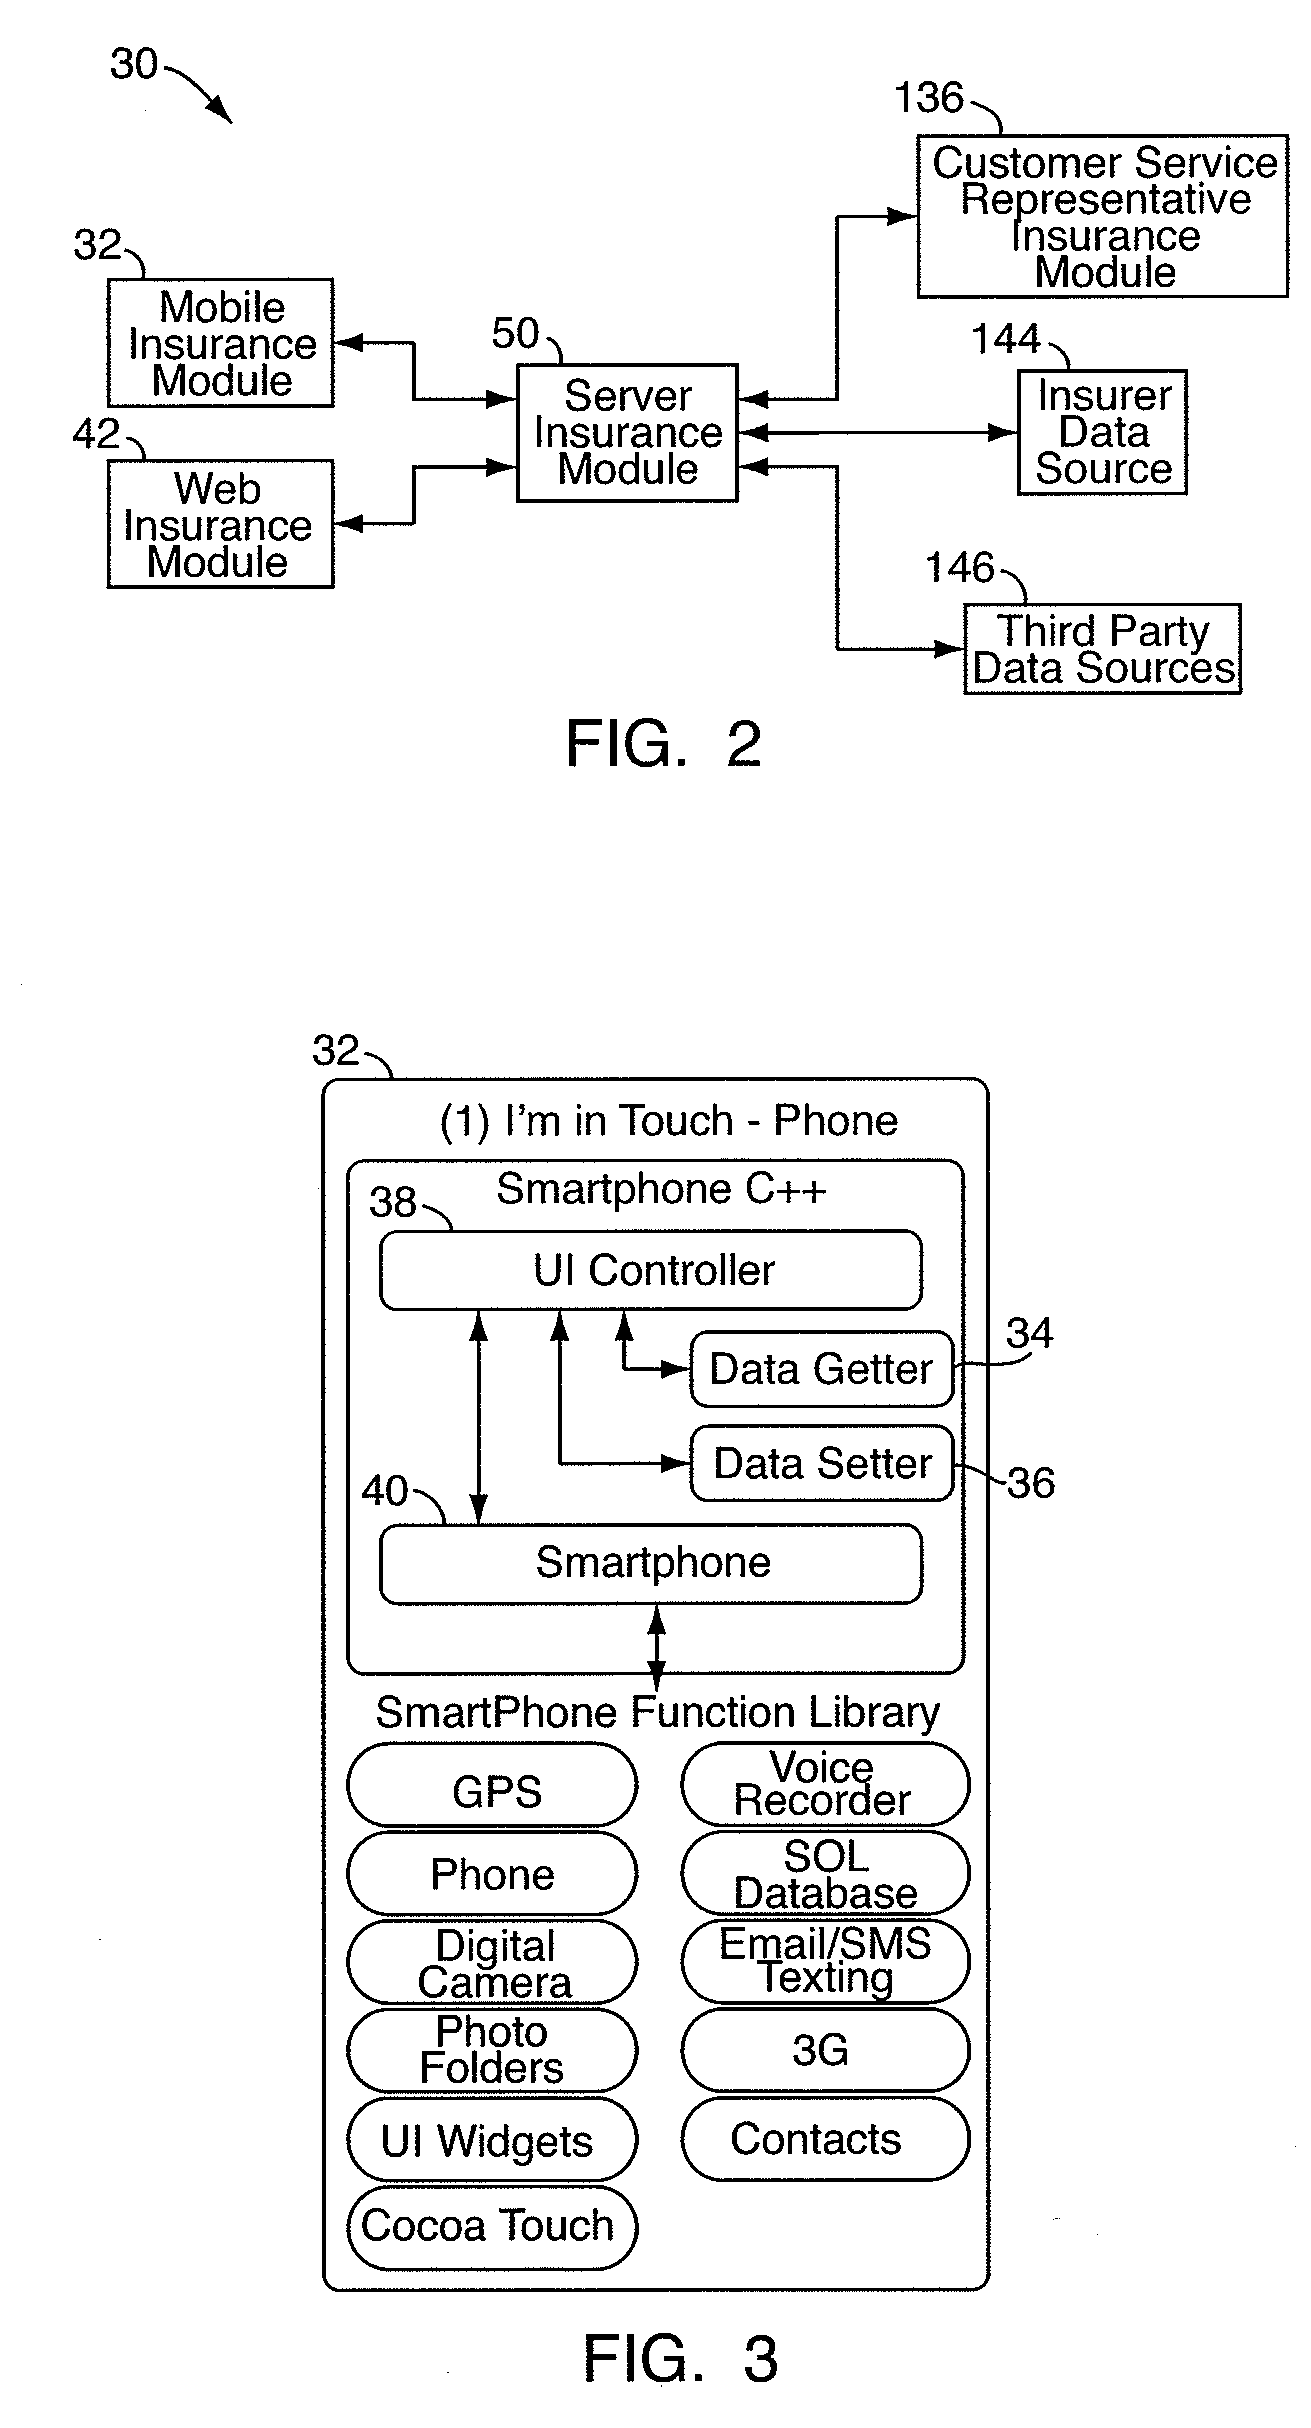 Method and system for connecting an insured to an insurer using a mobile device